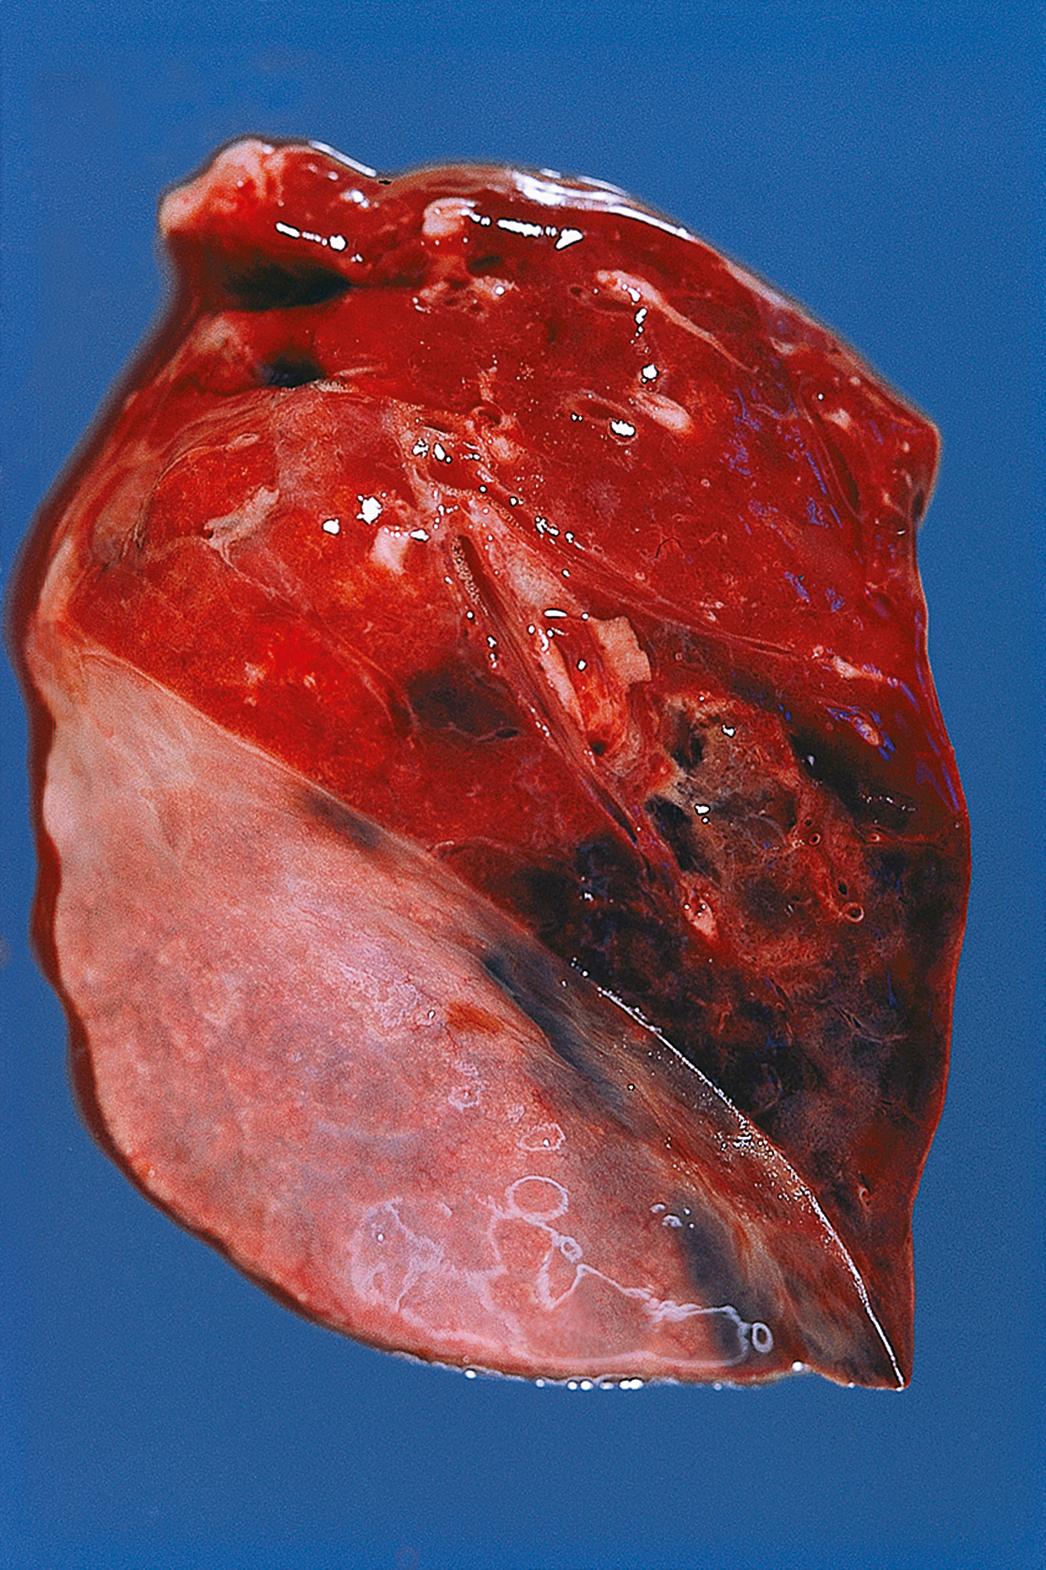 E-Fig. 9.3 G, Pulmonary embolus. Cut surface of a pulmonary infarct showing the embolus in the supplying artery at the apex of the pyramid-shaped infarct.